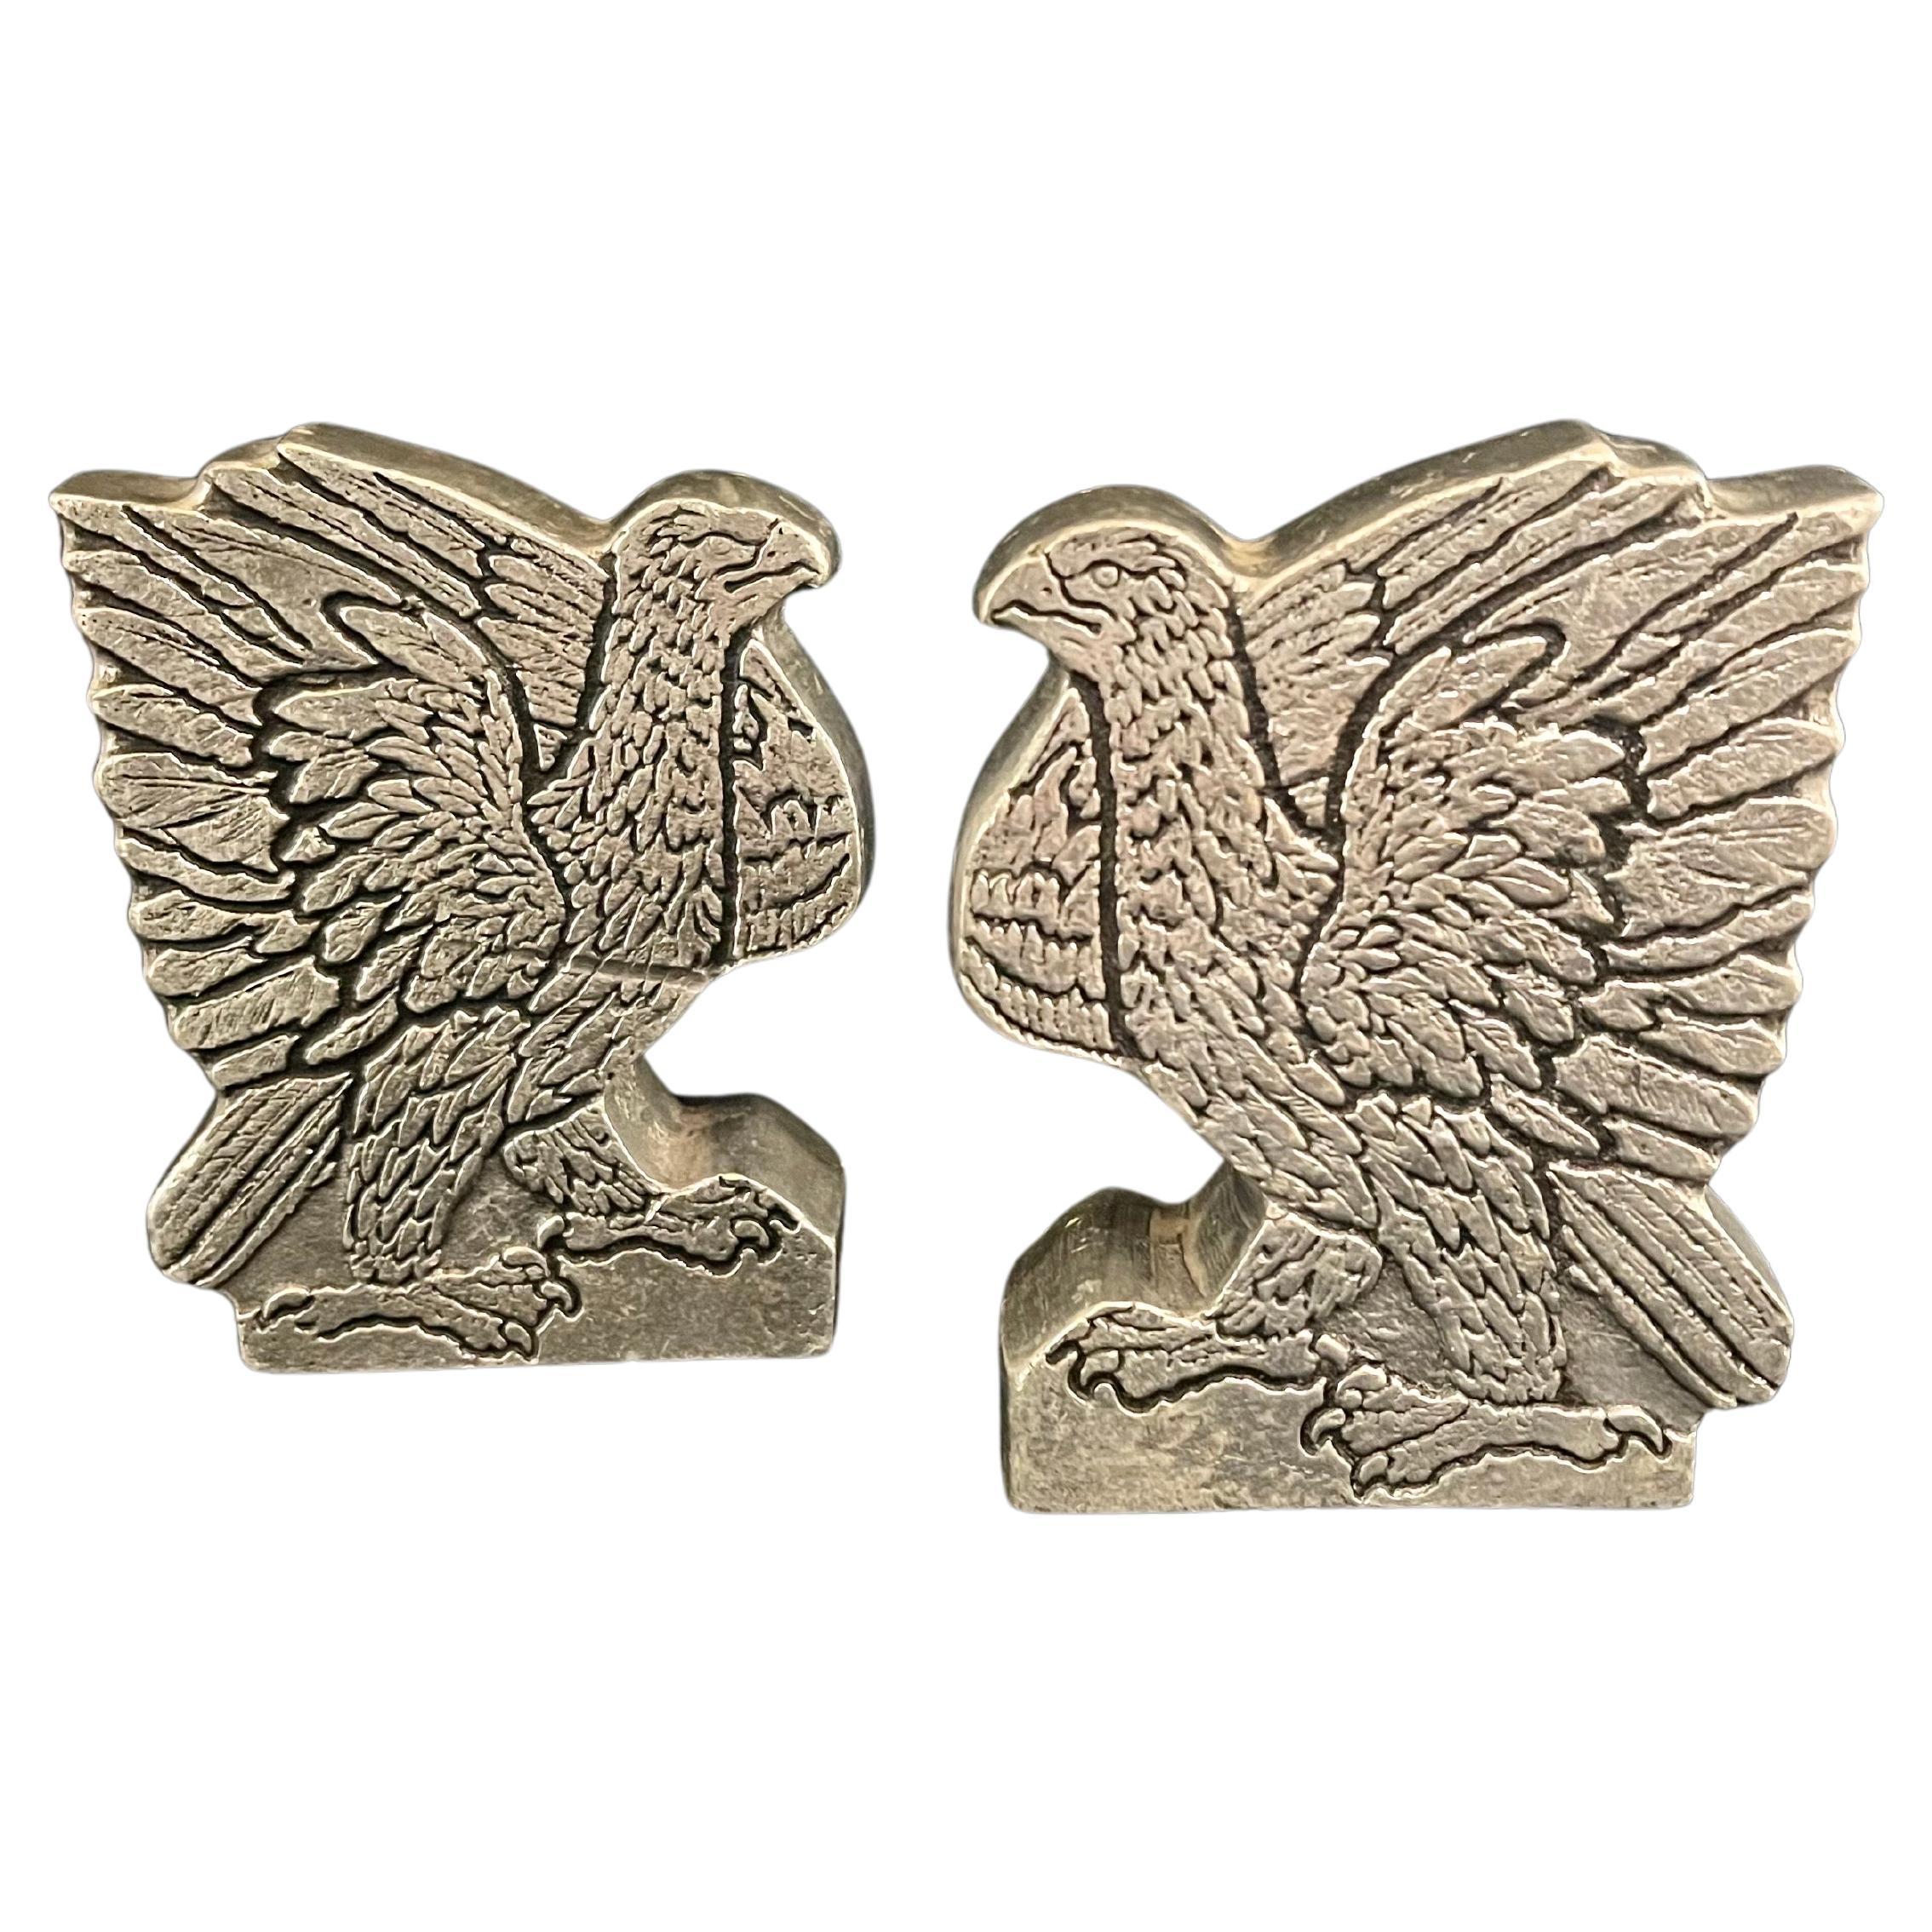 American Eagle Pair of solid Pewter bookends By Wilton Columbia 